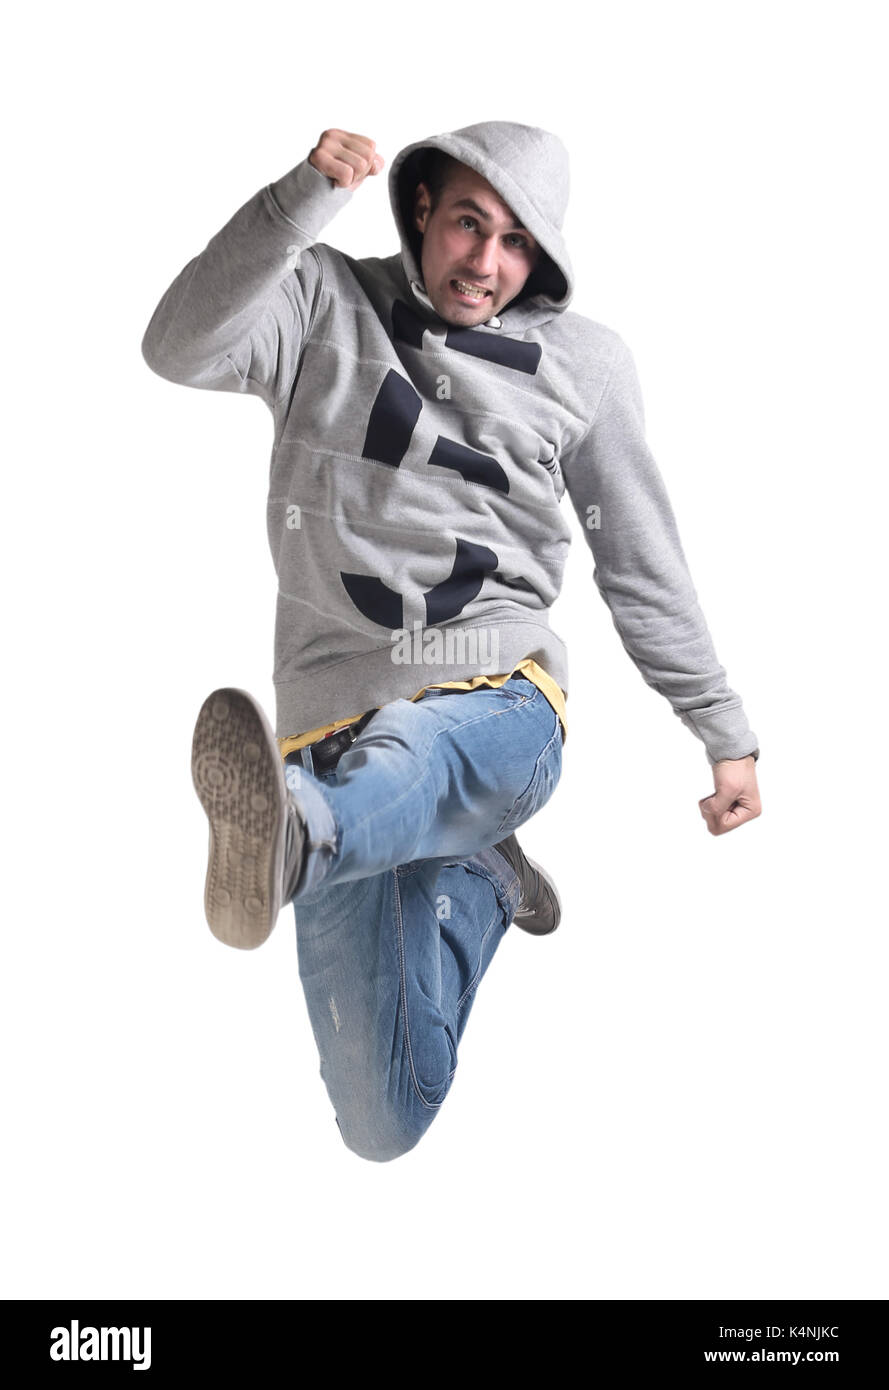 Funny cheerful happy man jumping in air over white background Stock Photo -  Alamy